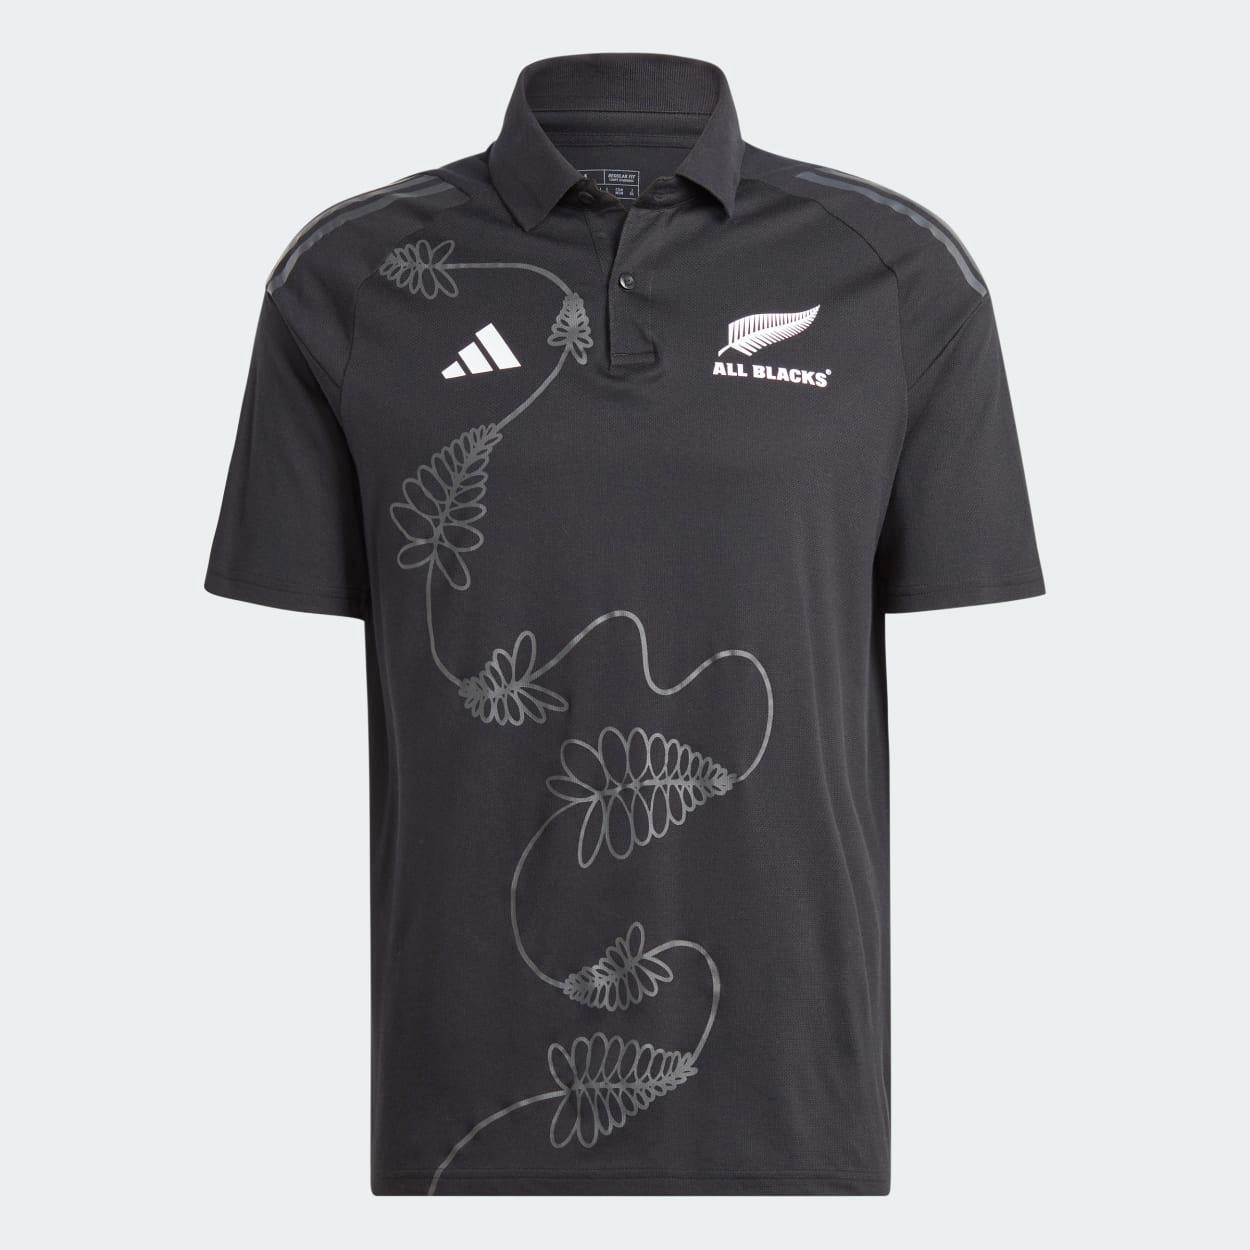 Official New Zealand All Blacks Rugby Shirts & Kits, Clothing 